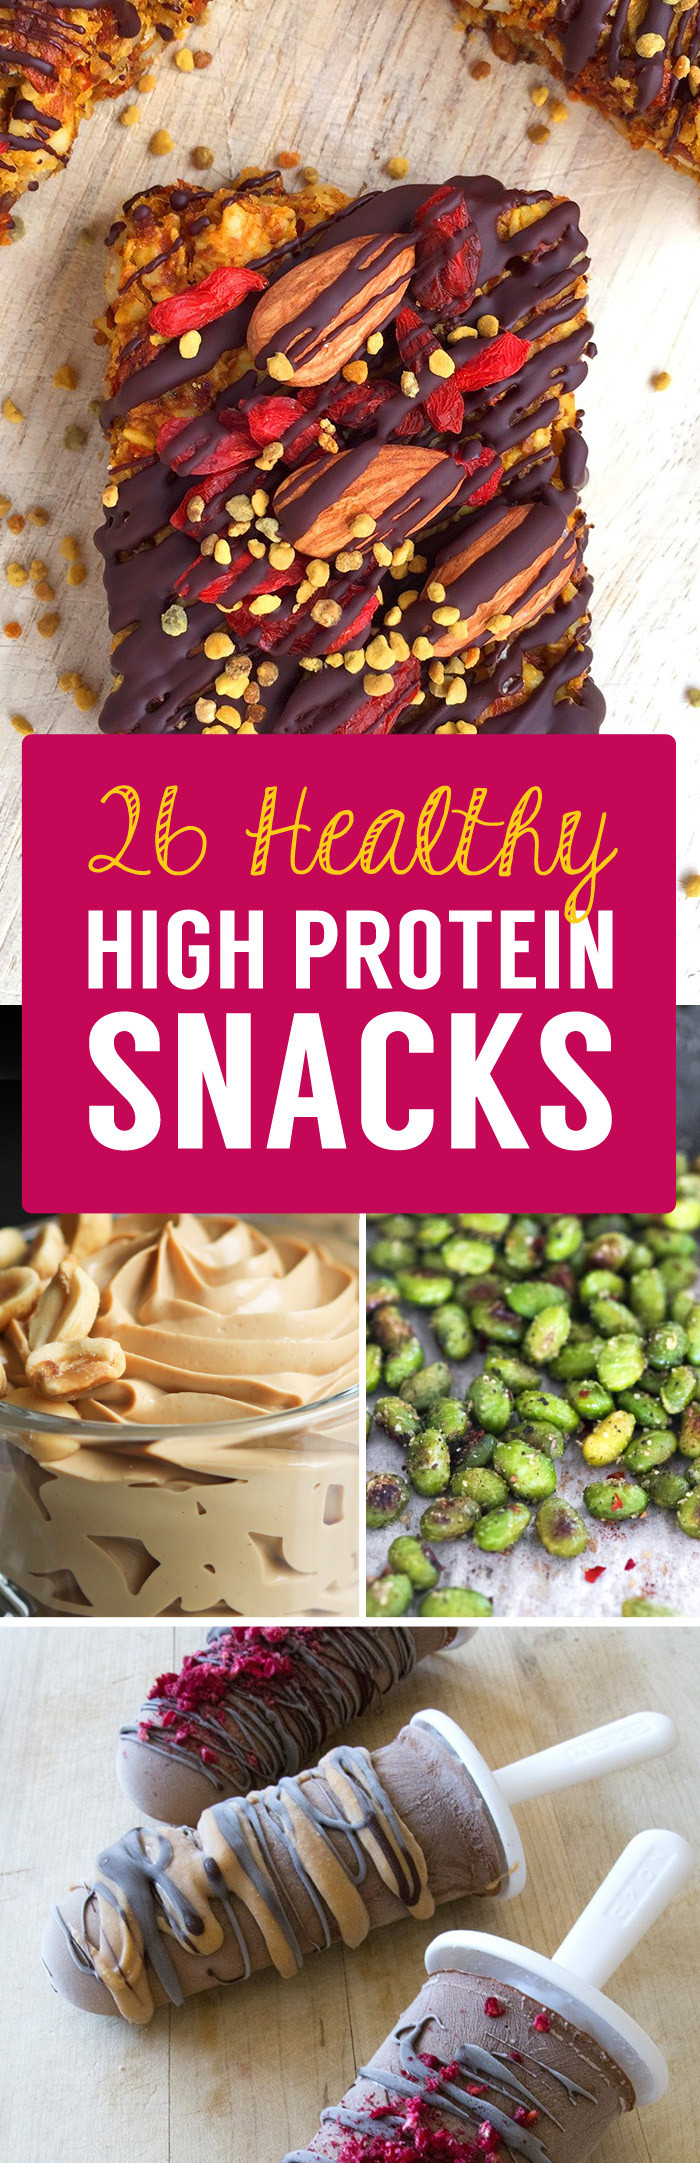 High Protein Snacks Recipes
 26 High Protein Snacks That Will Help You Lose Fat & Feel